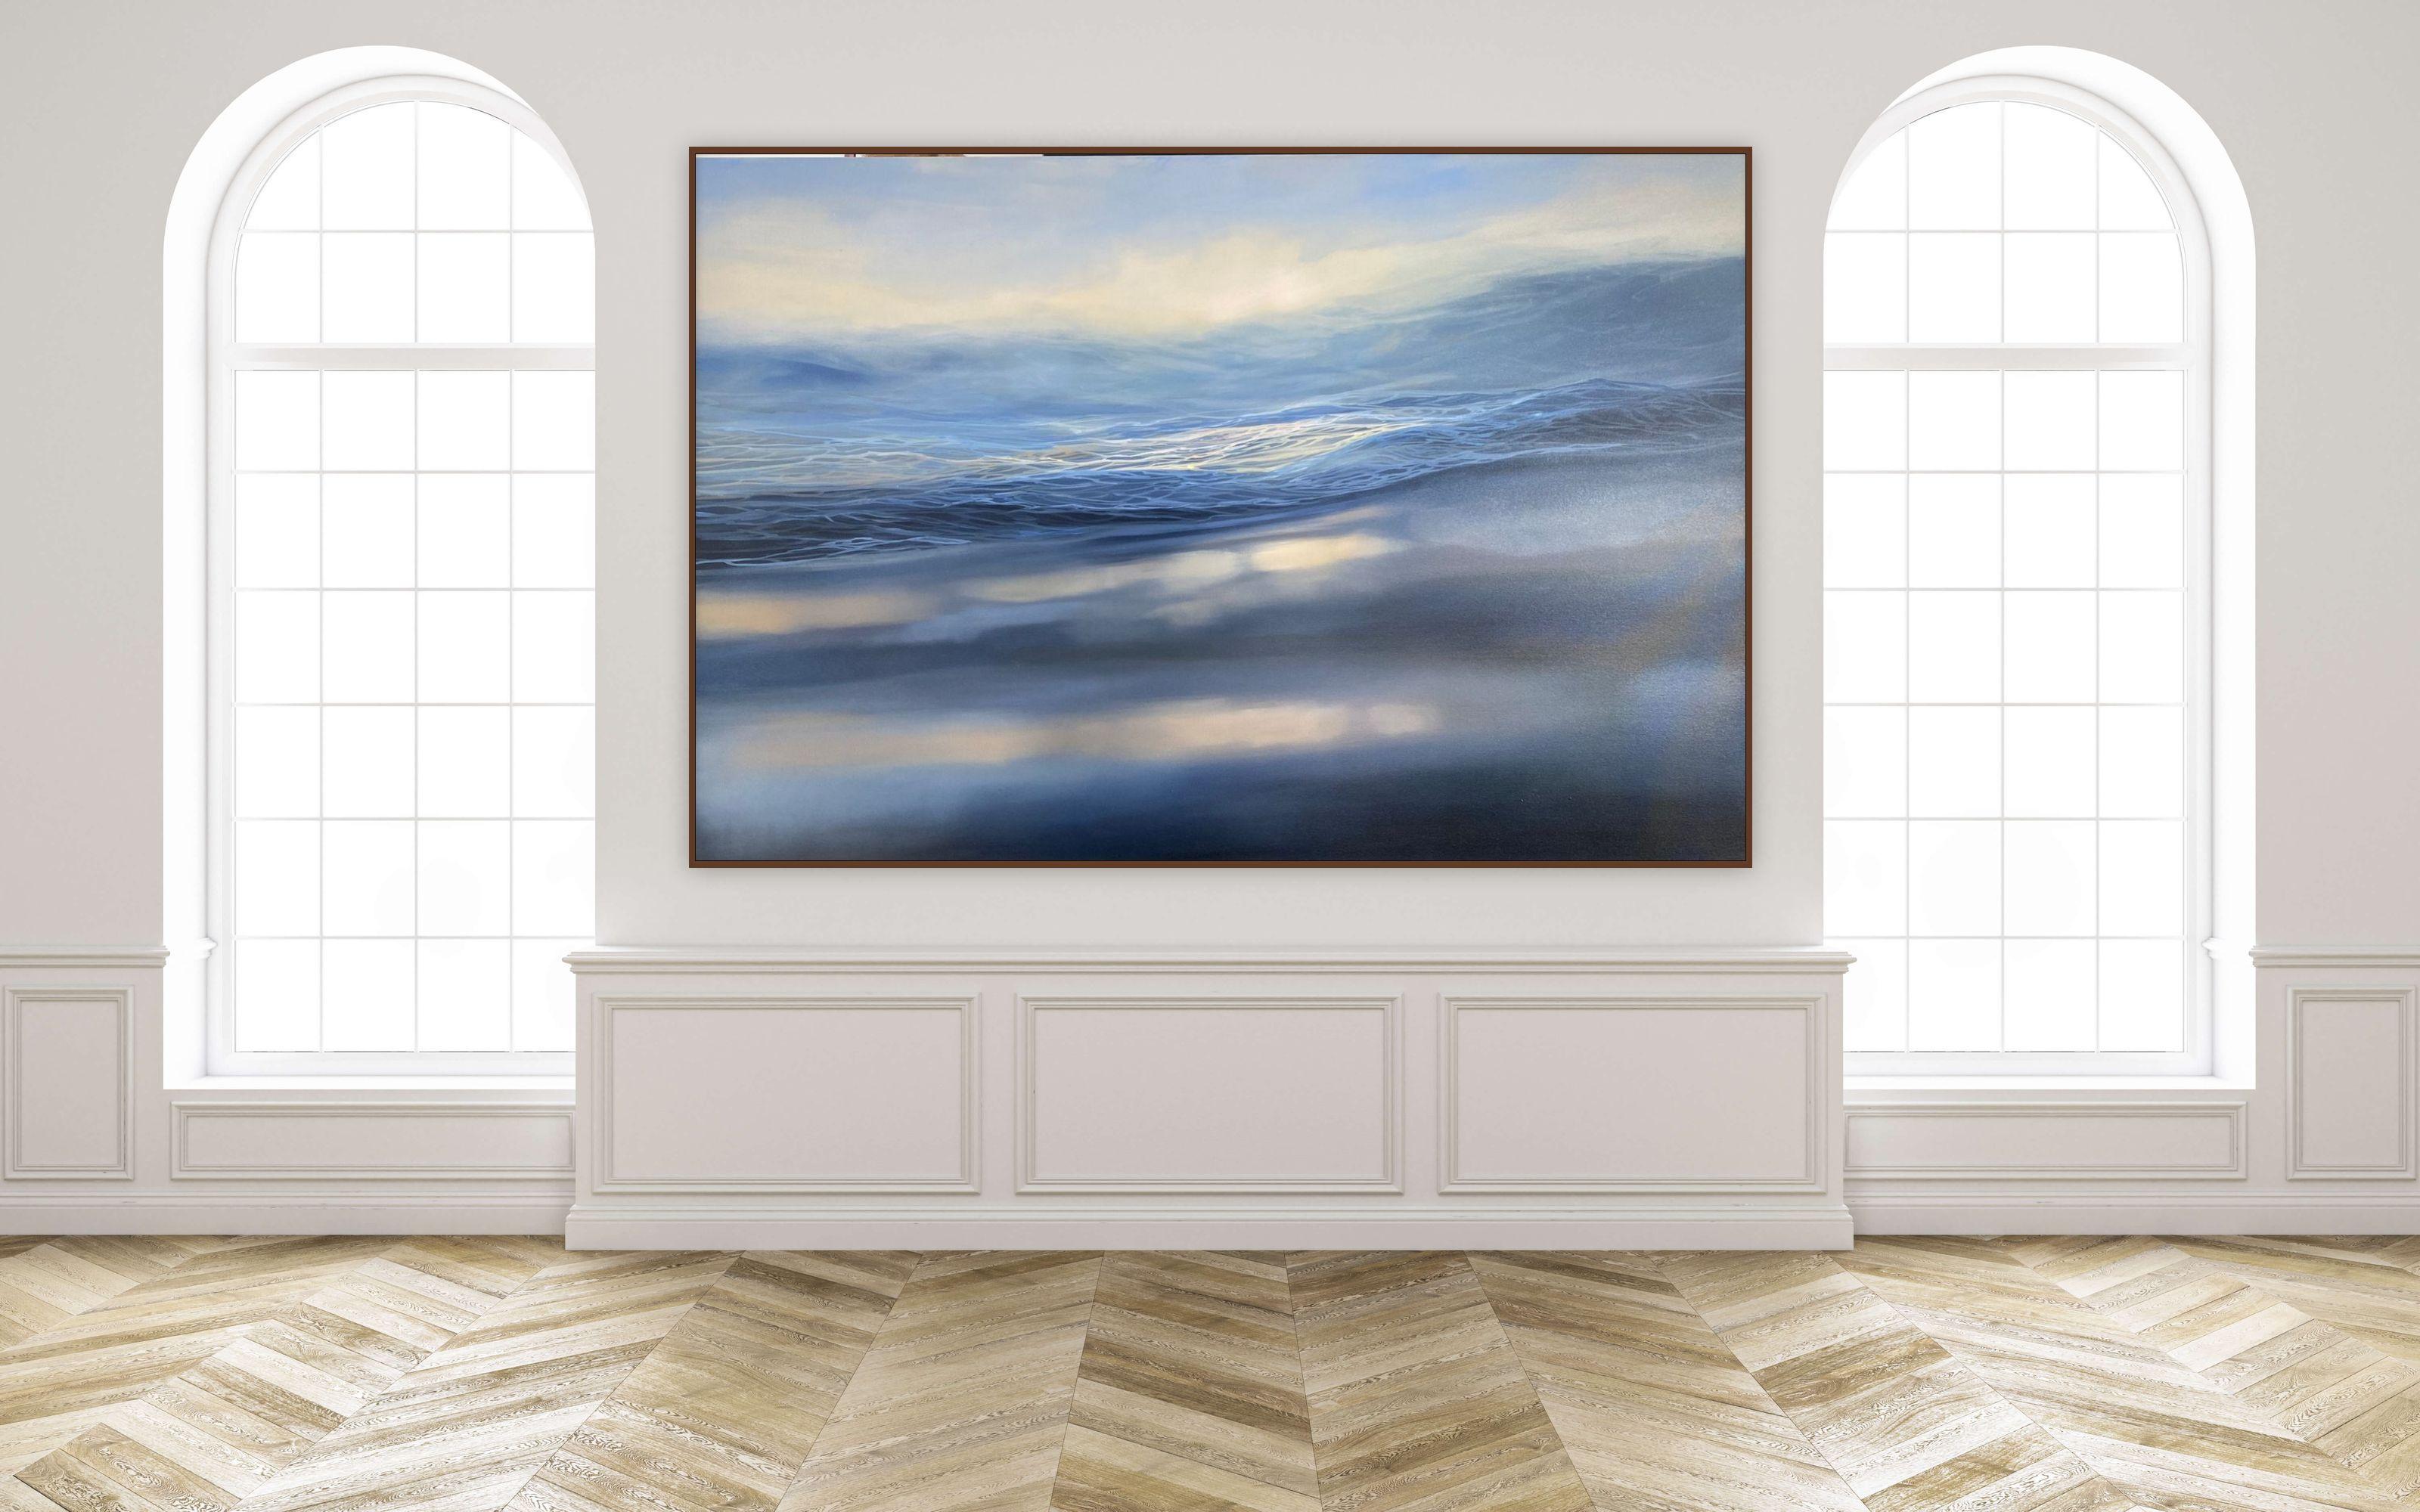 Catching That First Morning Wave - the sunlight hitting the blue ocean wave - Painting by Nat Anderson